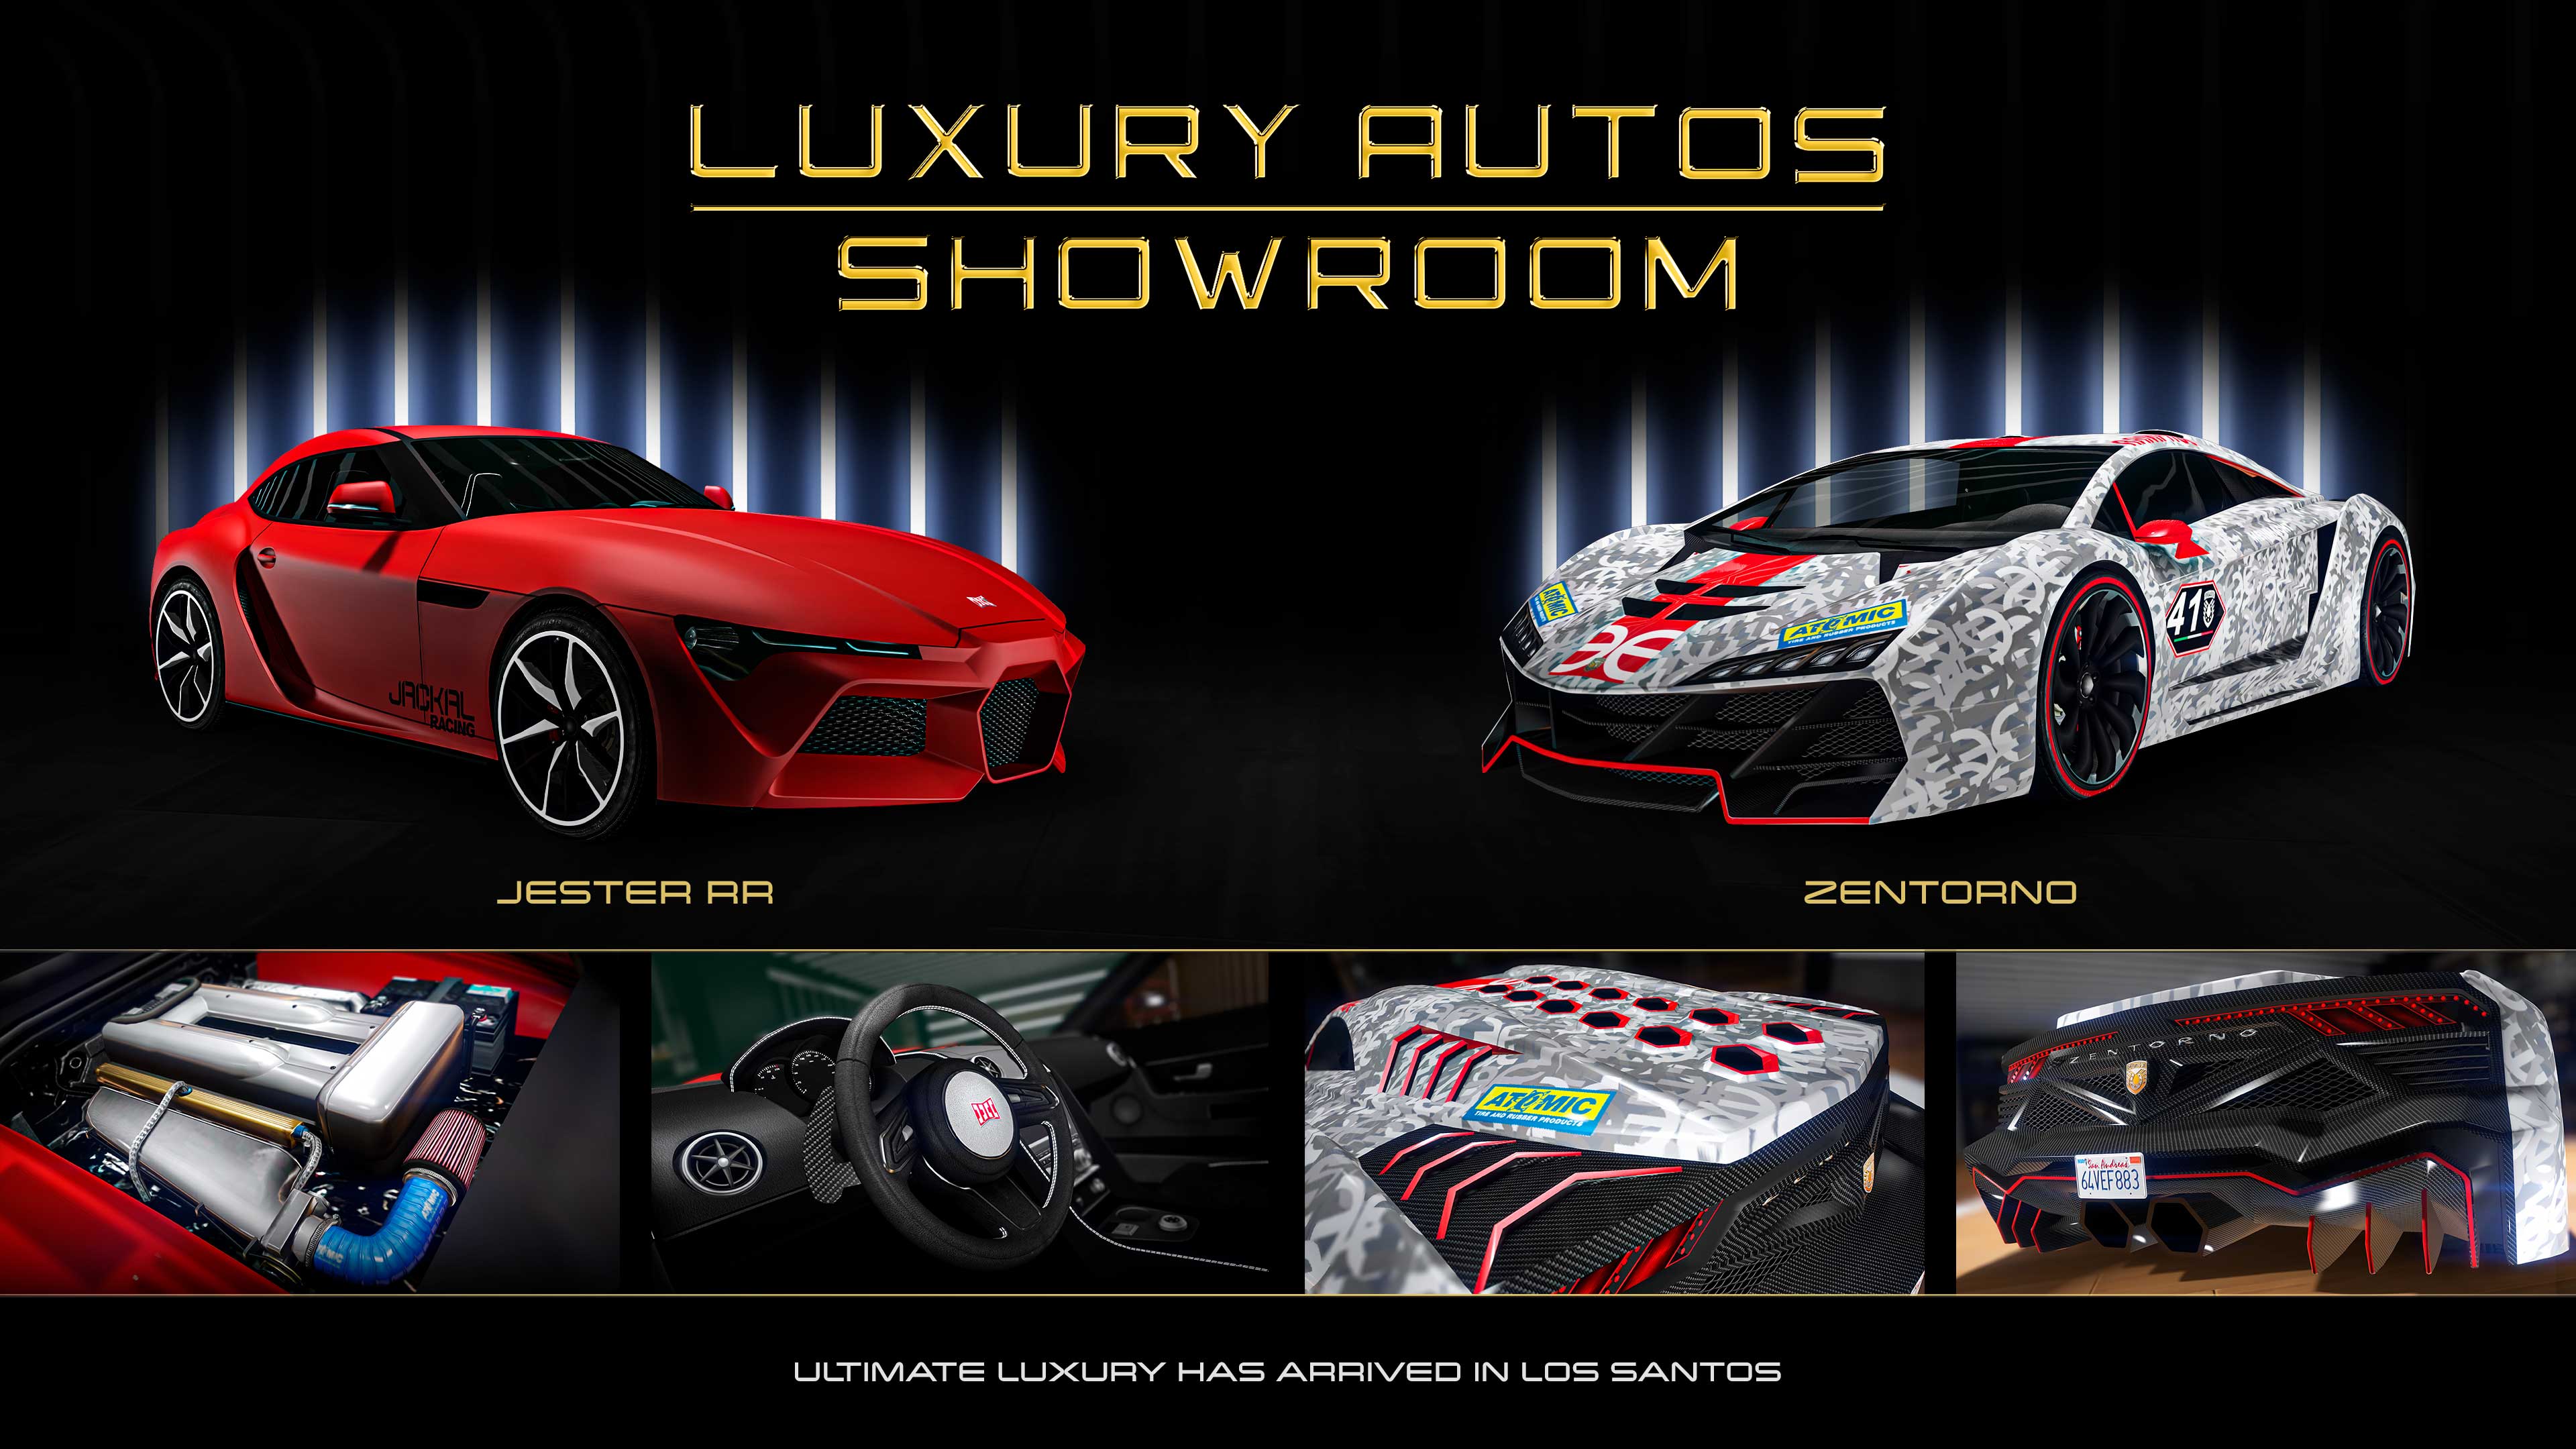 poster dell'autosalone Luxury Autos